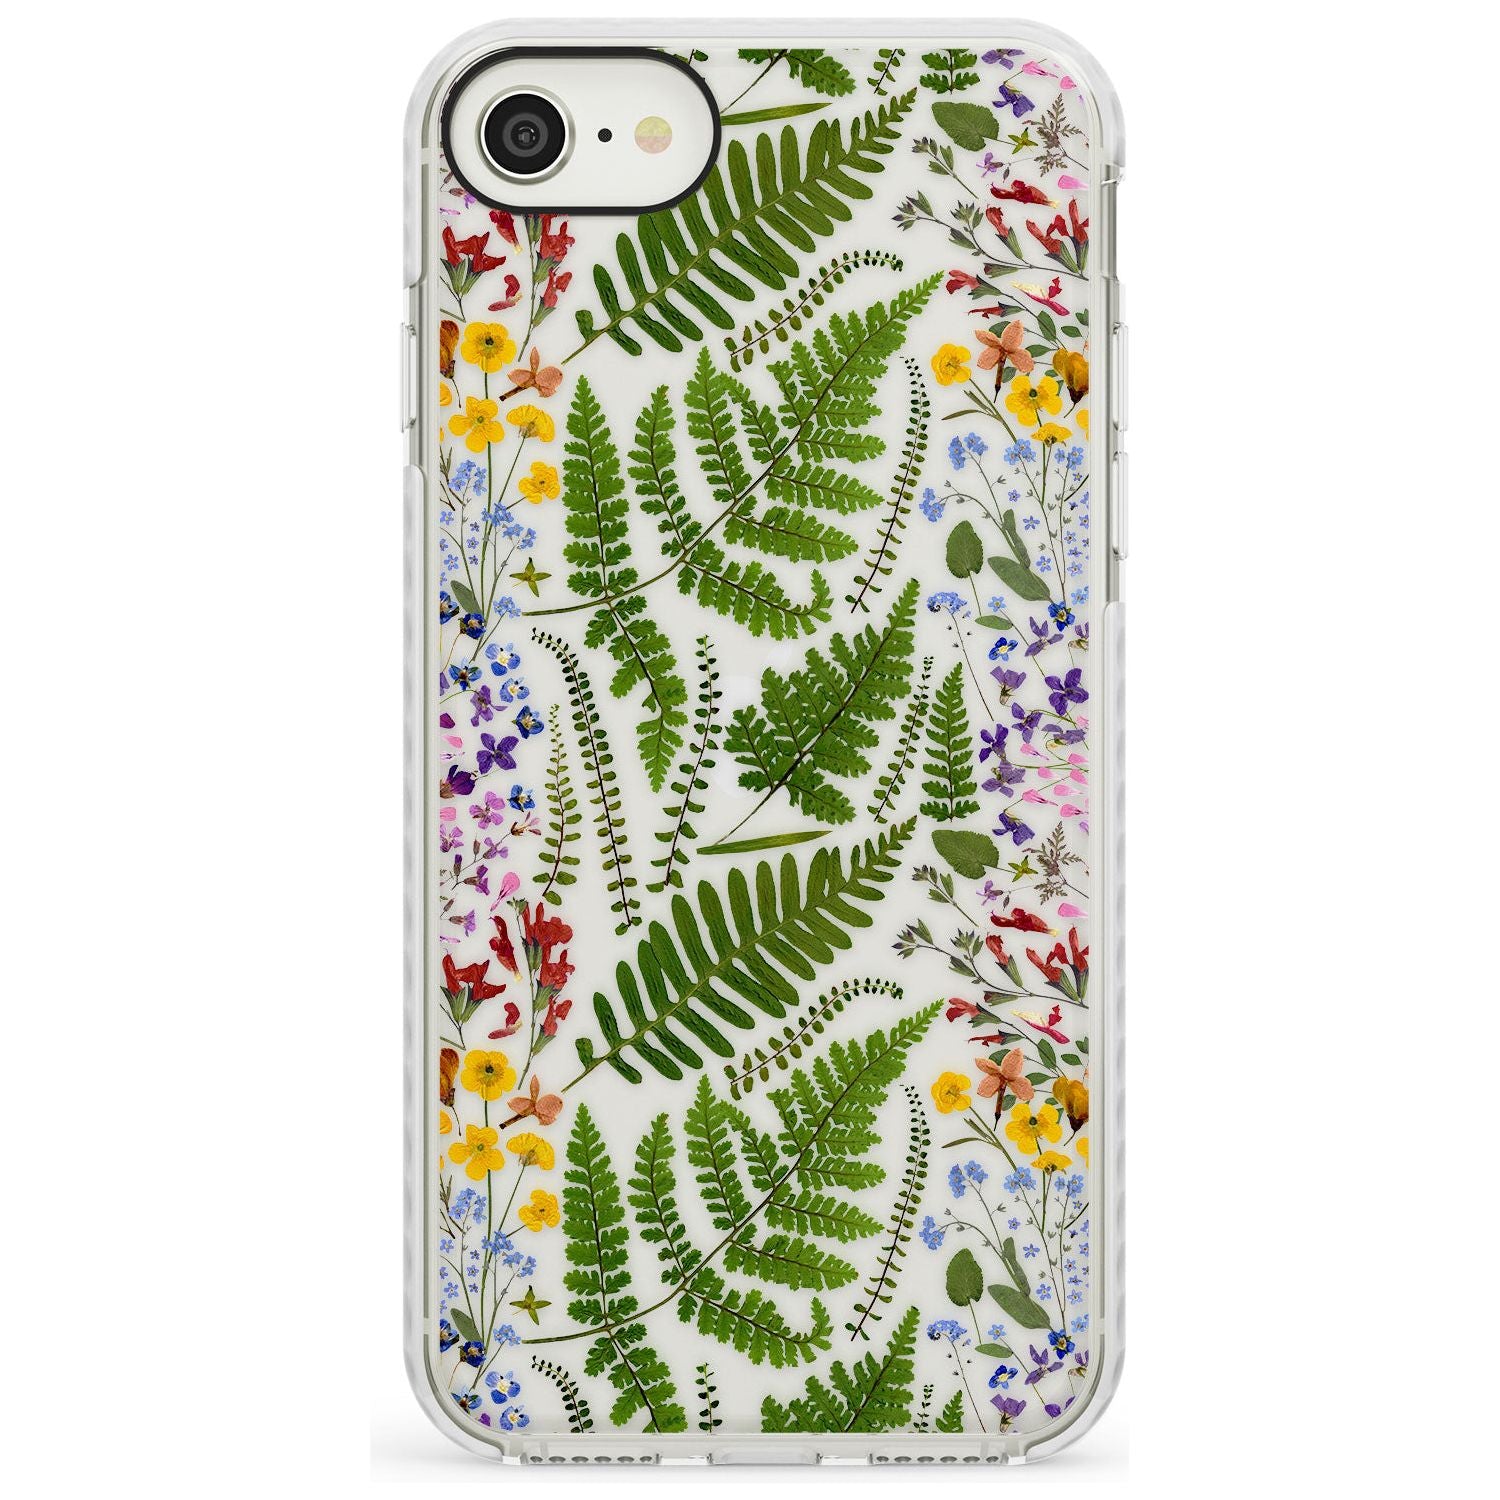 Busy Floral and Fern Design Impact Phone Case for iPhone SE 8 7 Plus